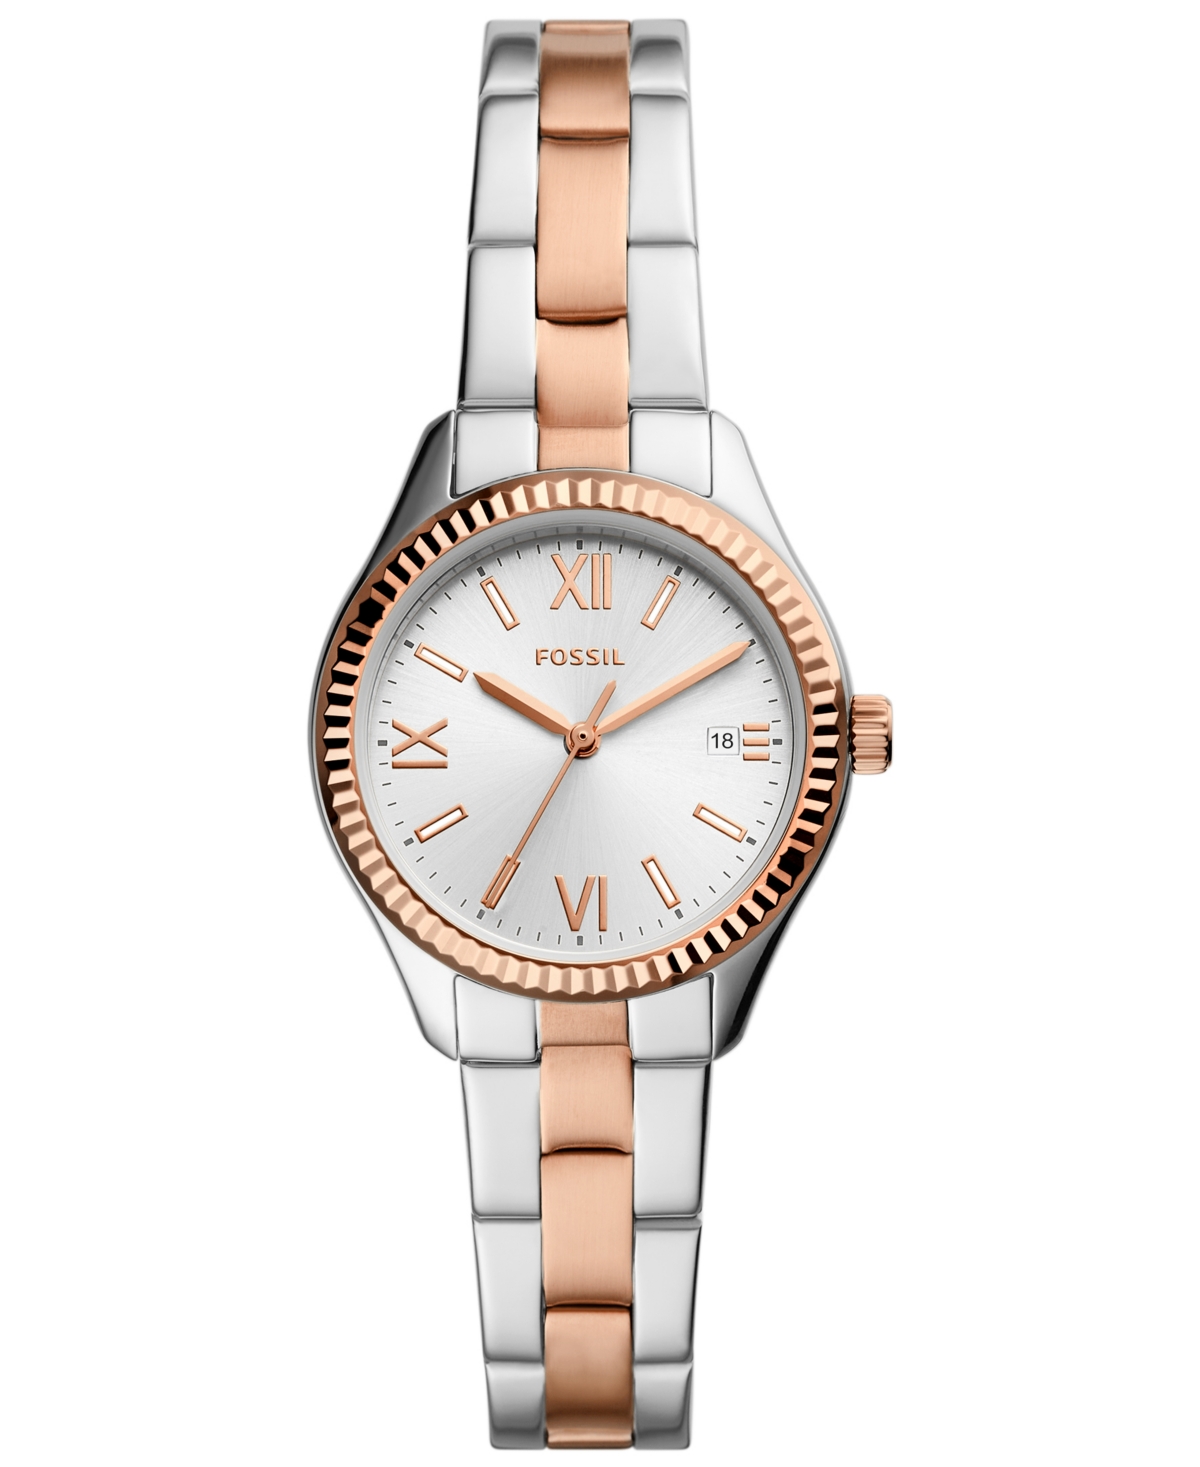 Fossil Women's Rye Three-hand Date Two-tone Stainless Steel Watch, 30mm